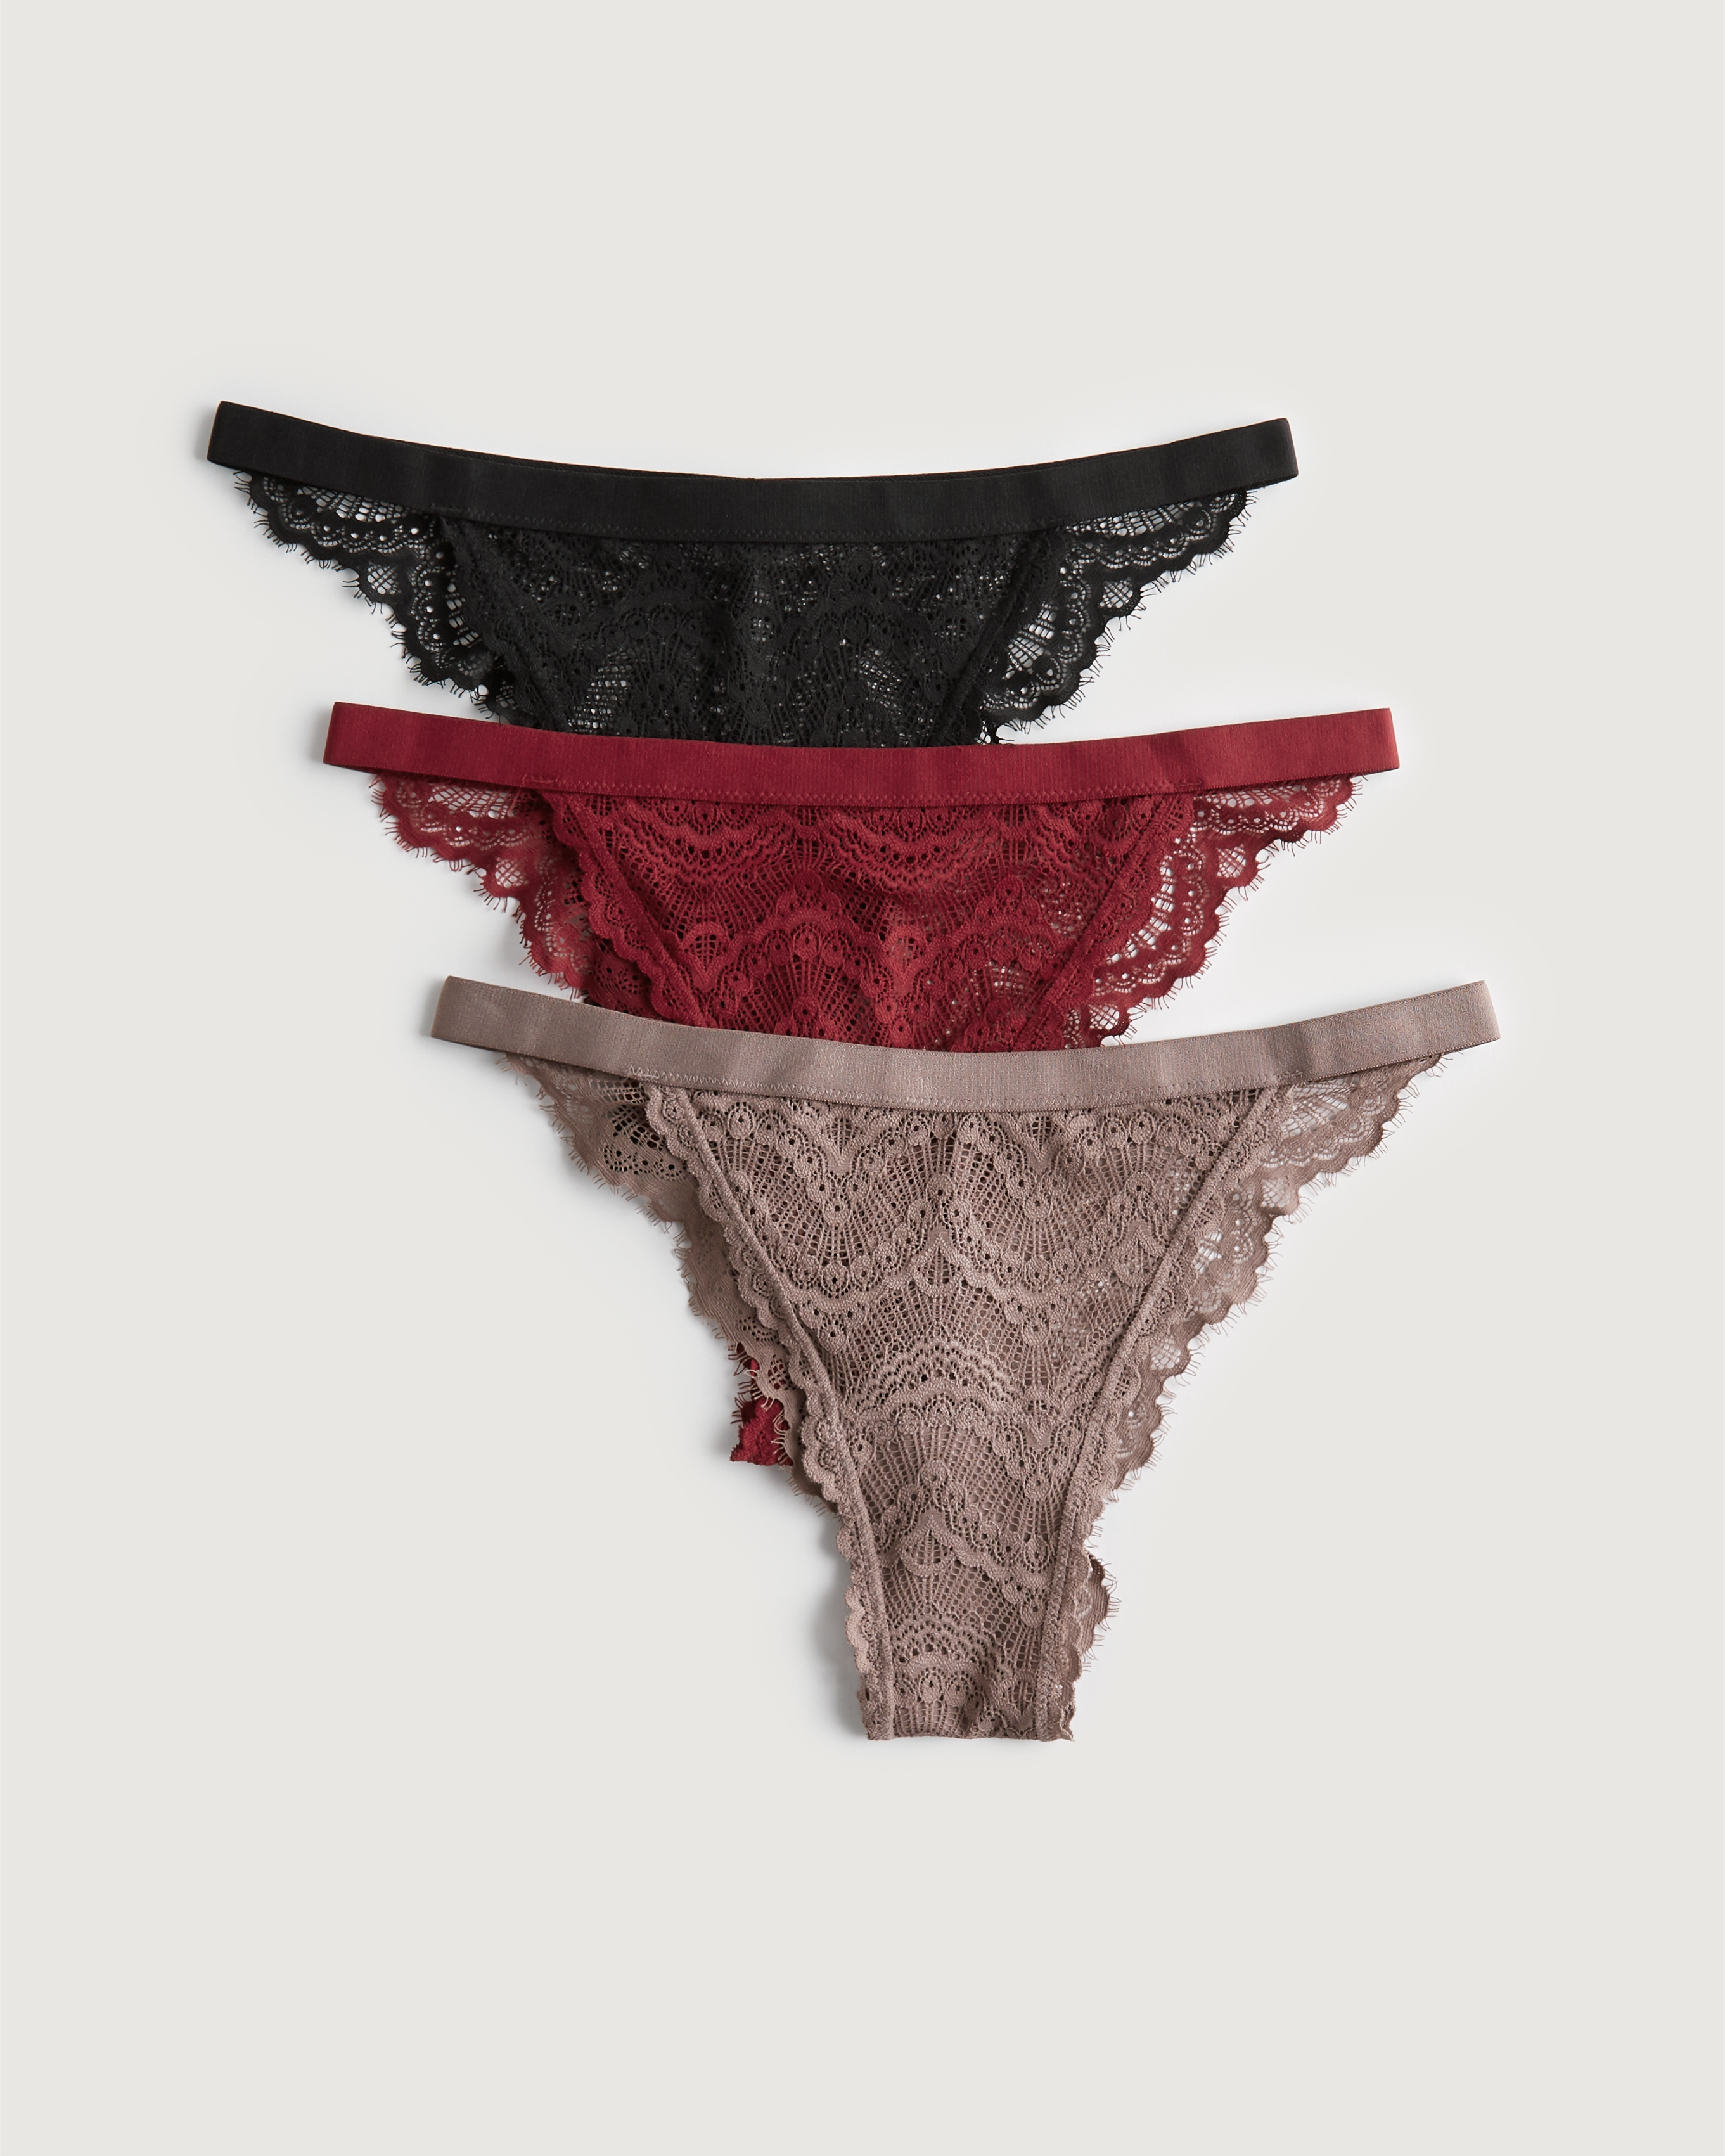 Hollister Gilly Hicks Lace String Cheeky 3-Pack